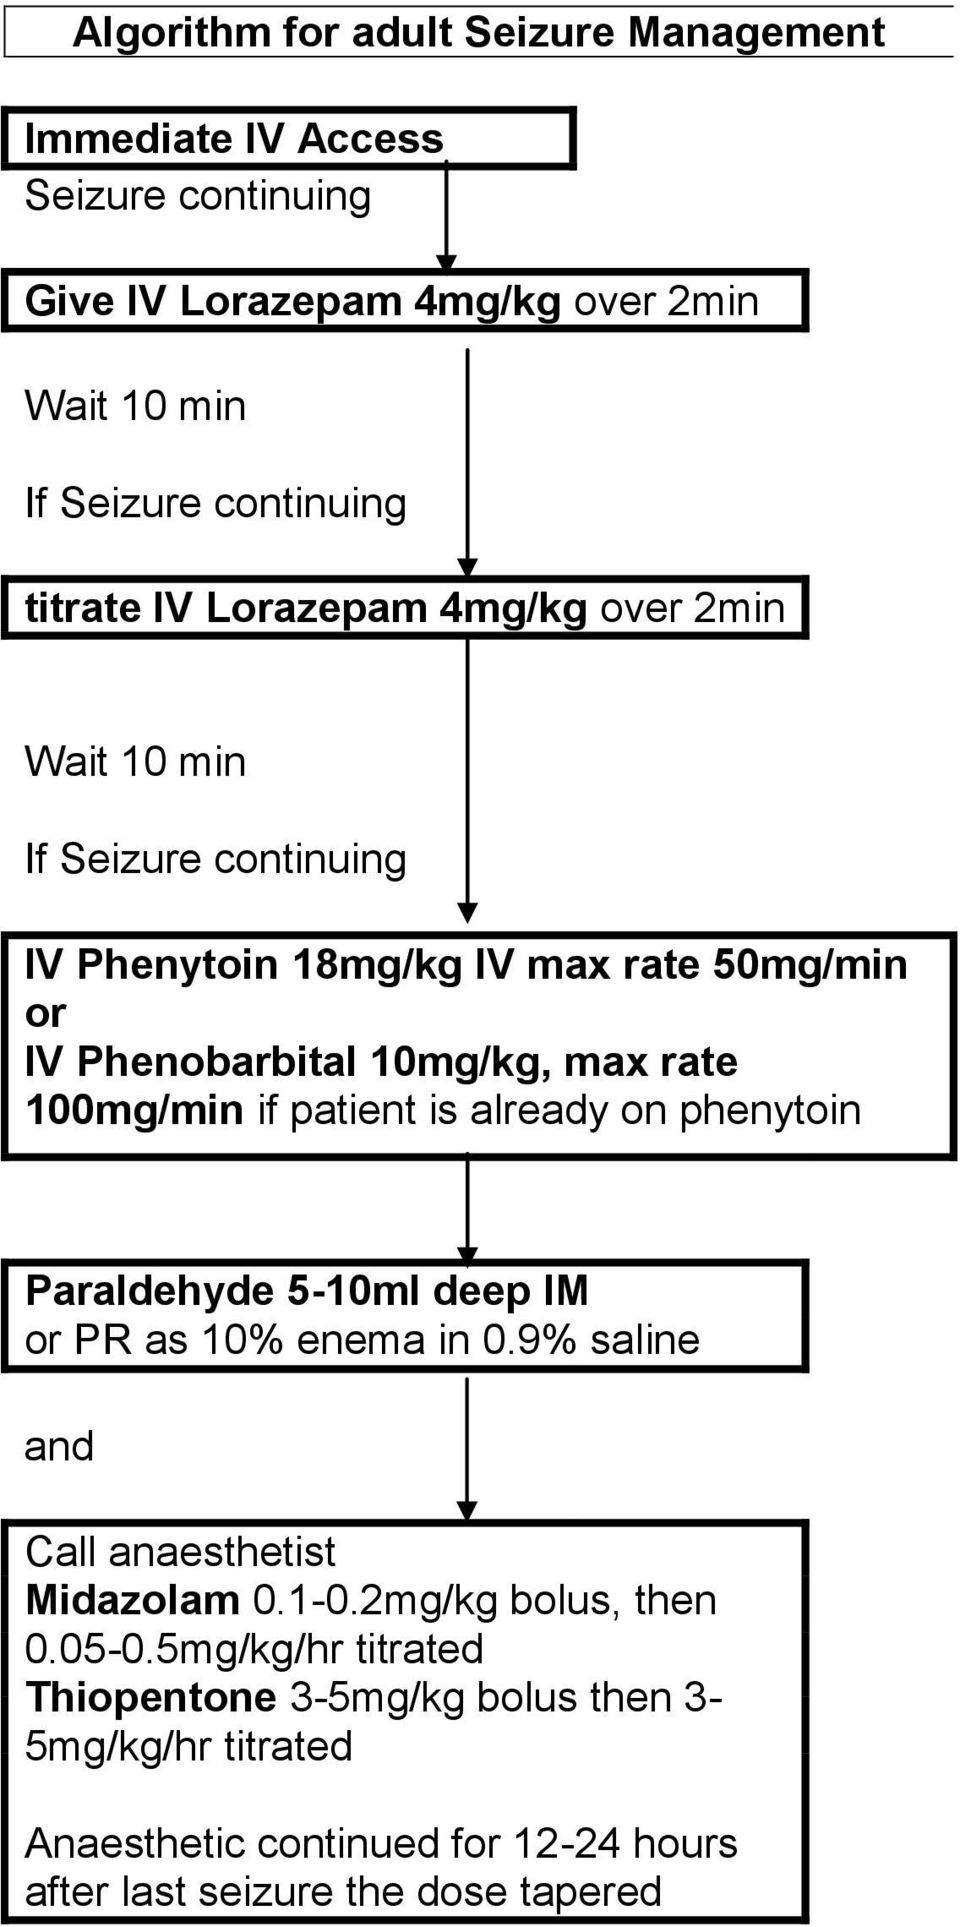 Paraldehyde 5-10ml deep IM or PR as 10% enema in 0.9% saline and Call anaesthetist Midazolam 0.1-0.2mg/kg bolus, then 0.05-0.